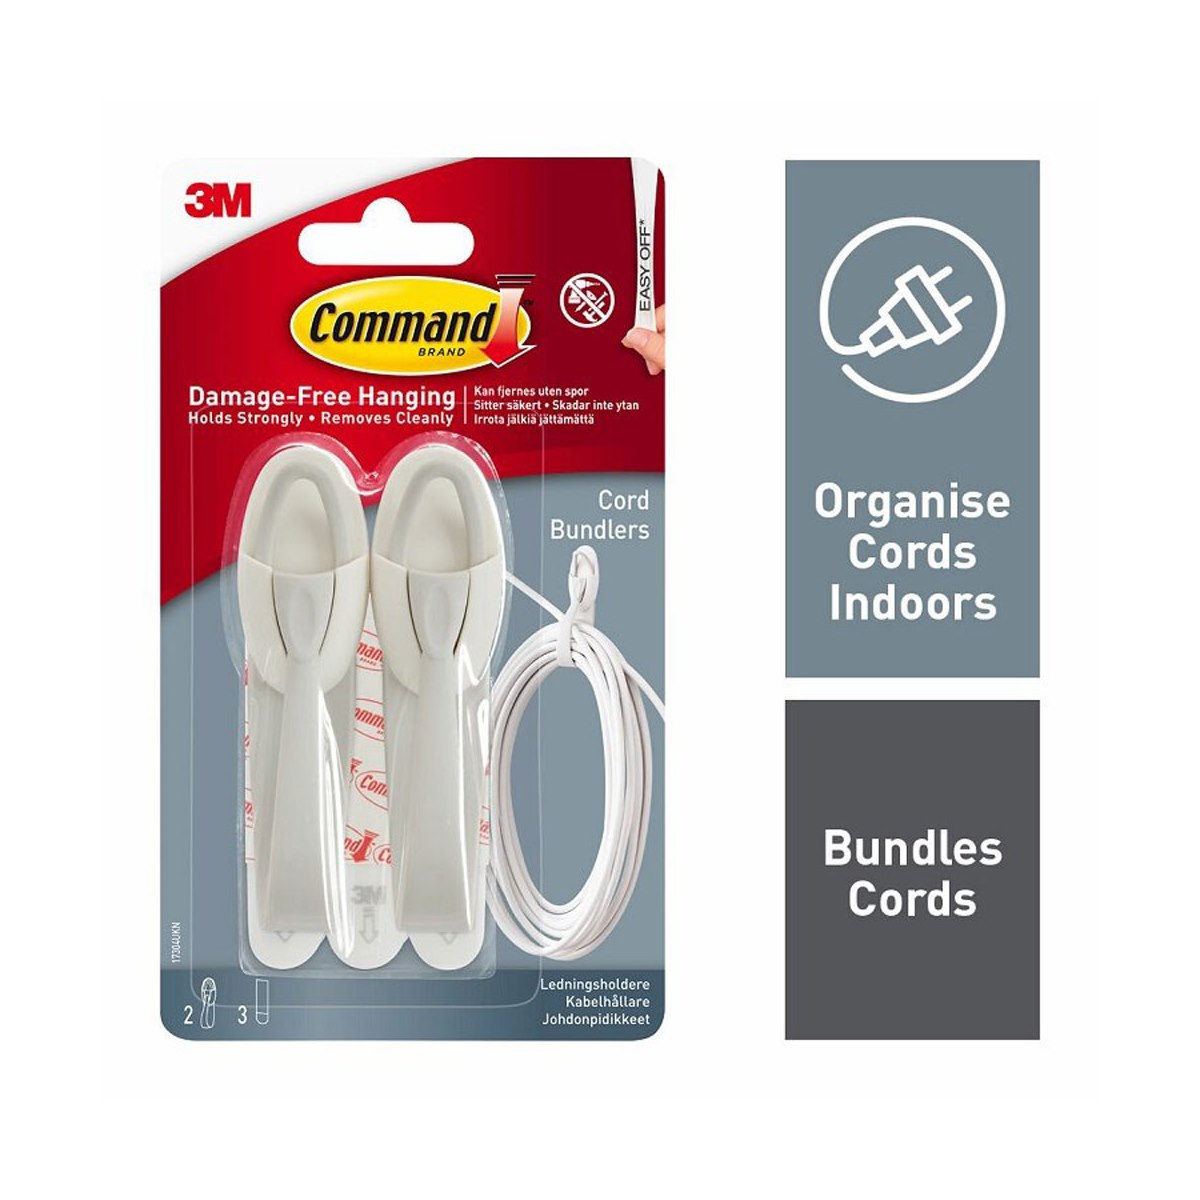 3M Command Cord Bundlers Pack of 2